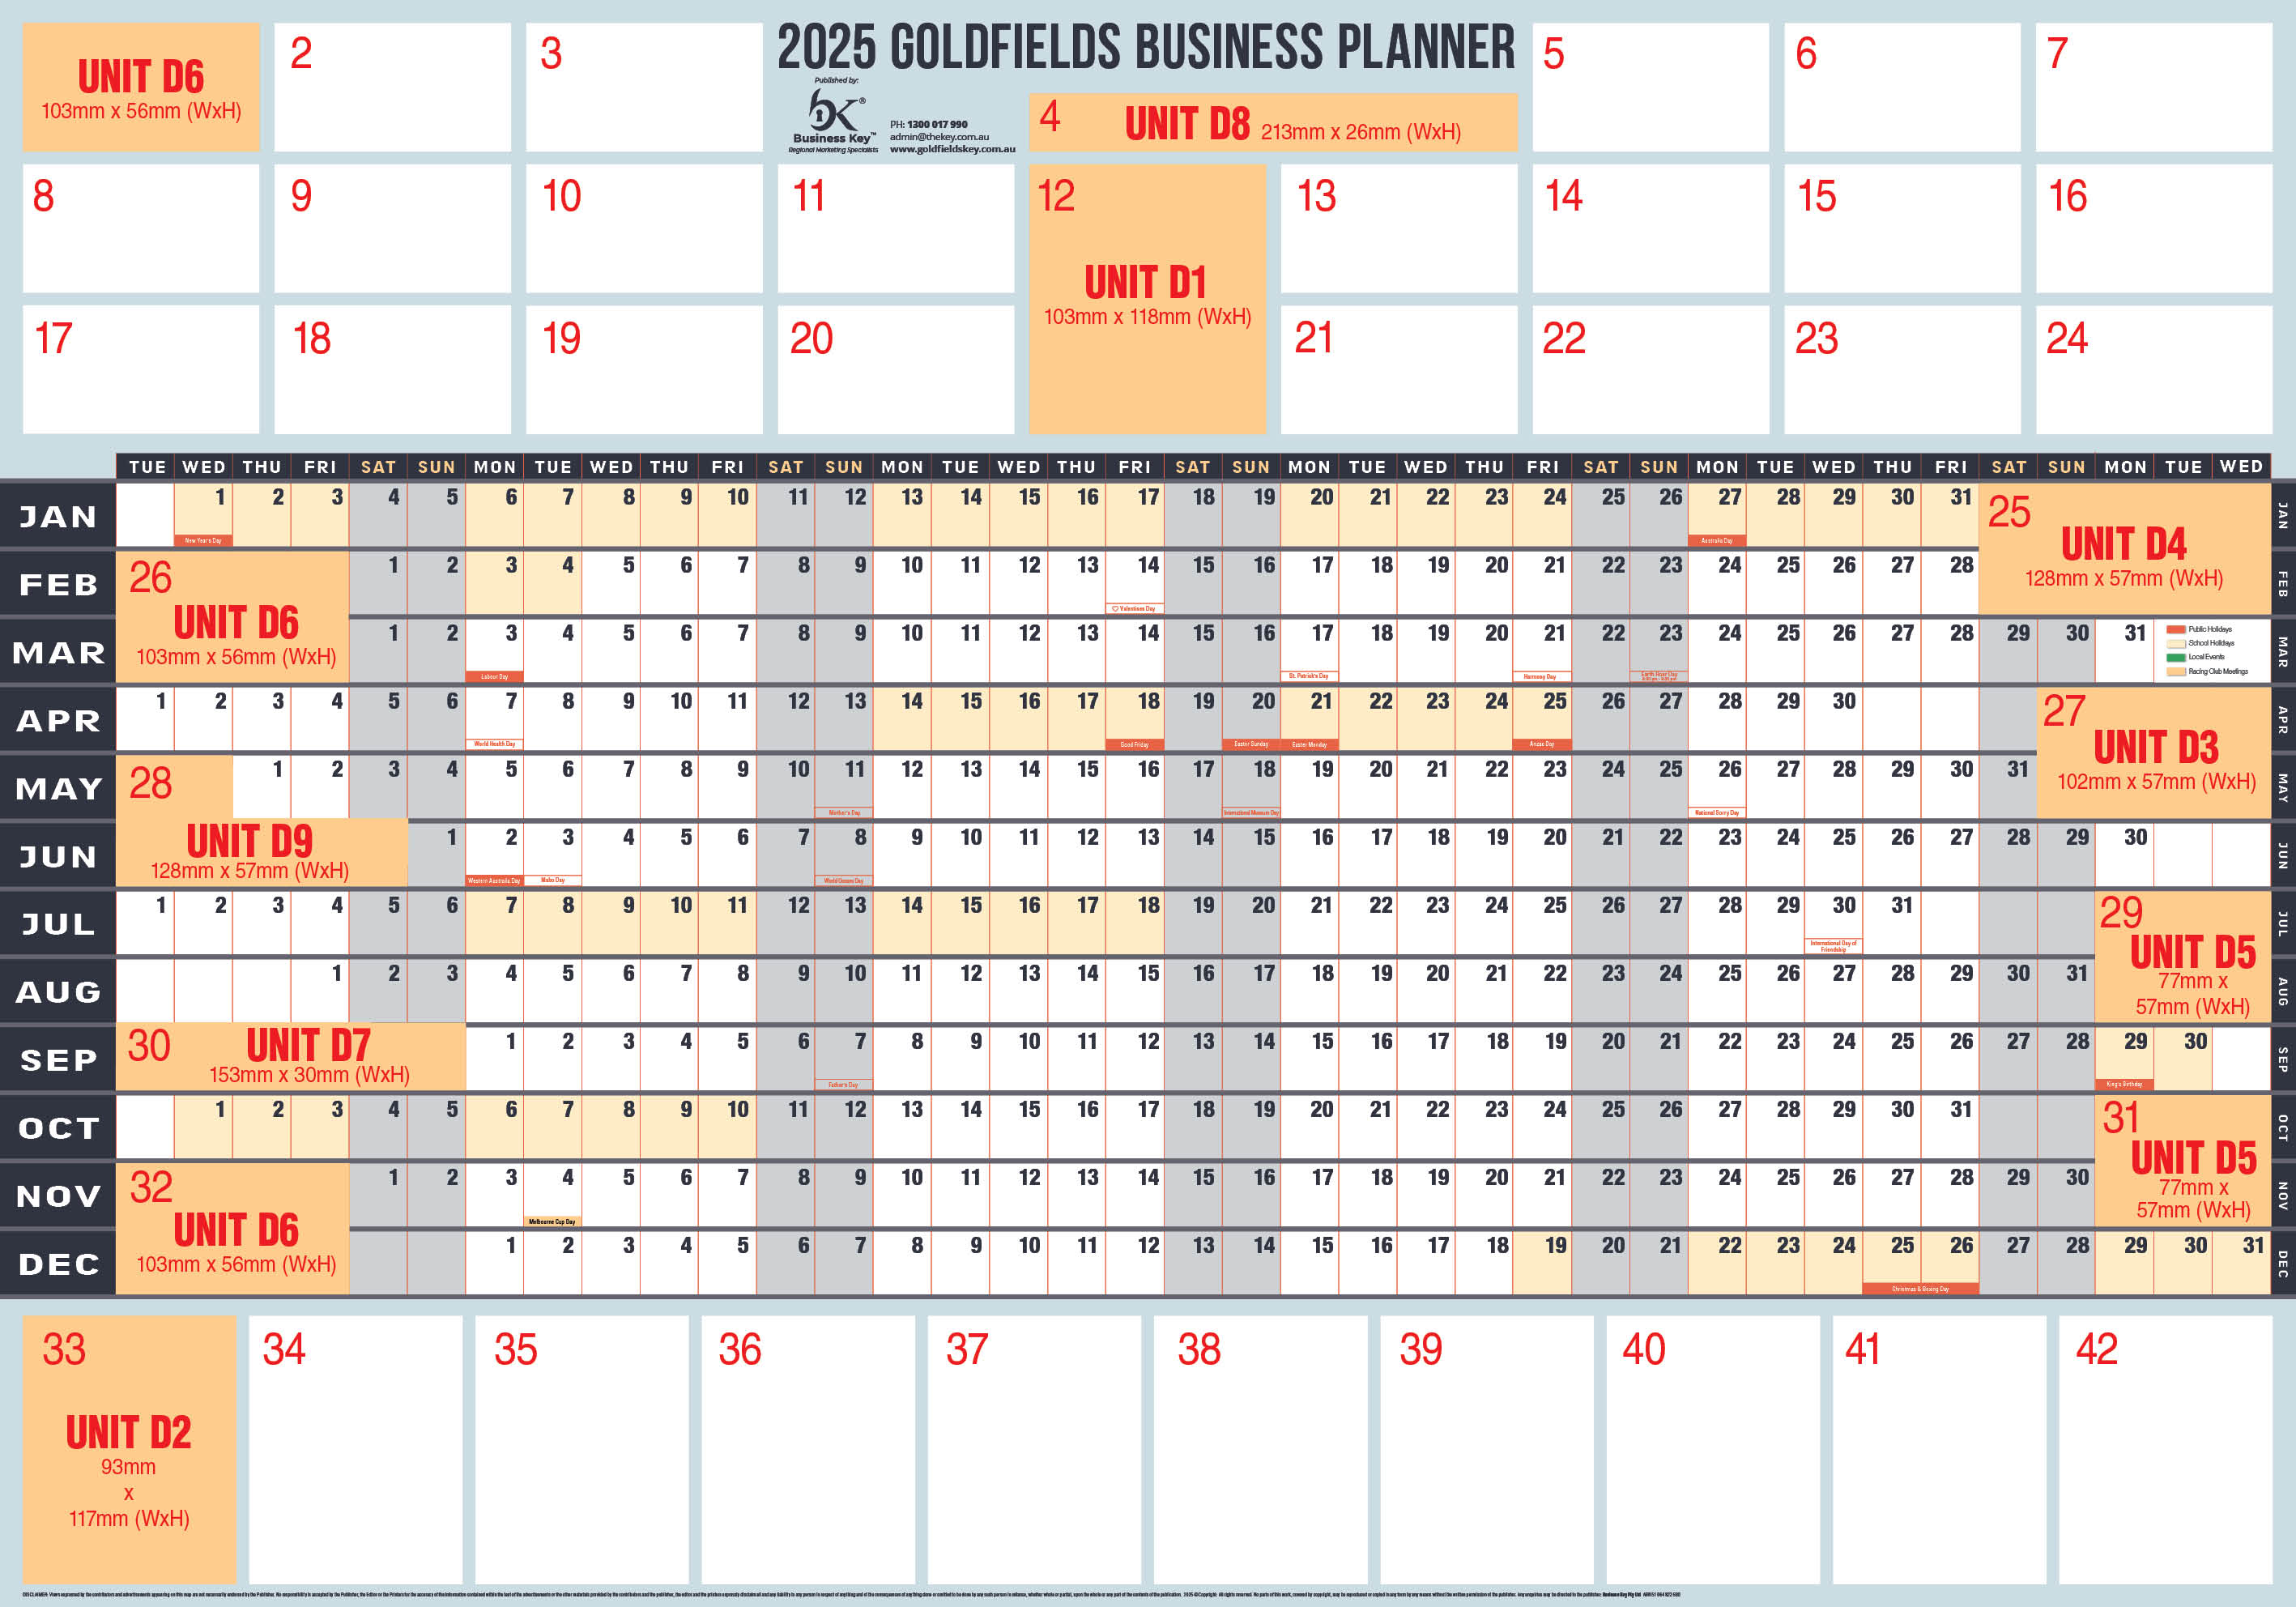 Goldfields Business Planner 2025 (Preview)